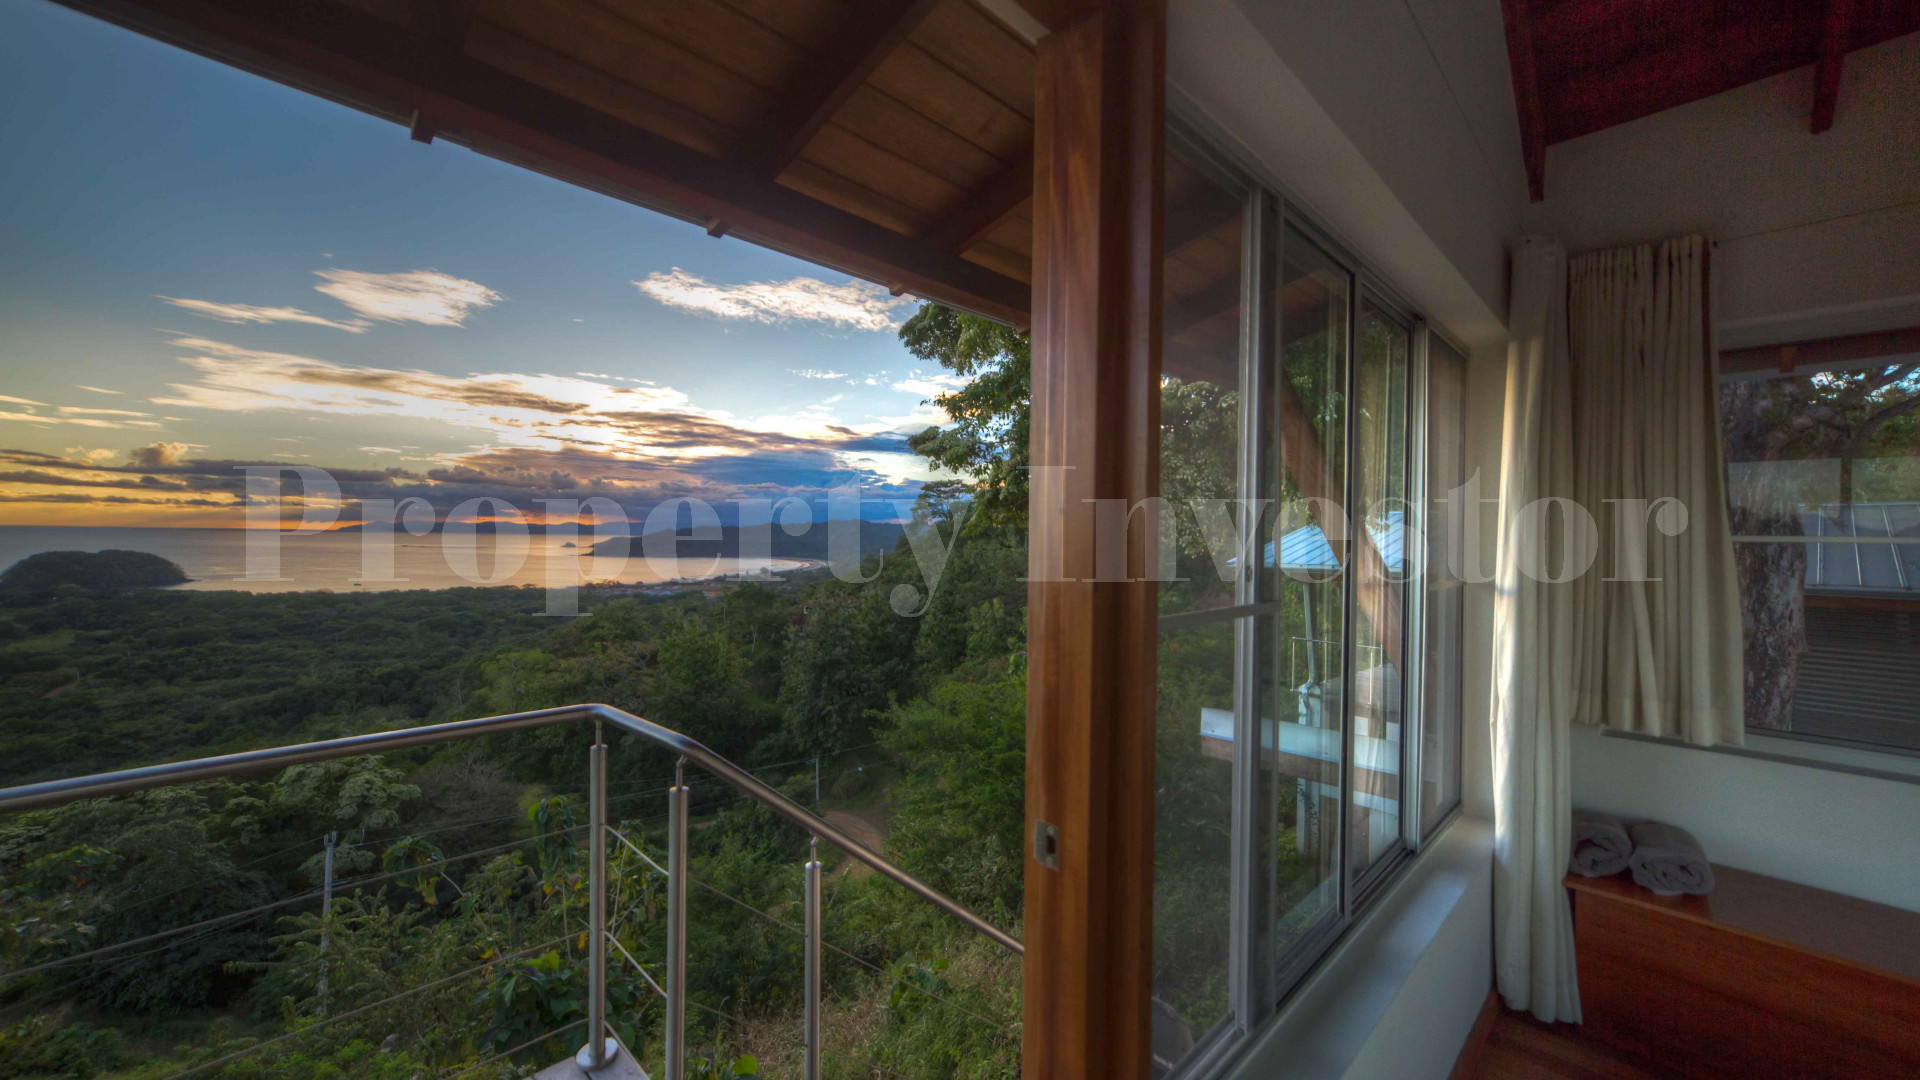 Spectacular 4 Bedroom Luxury Ocean View Home with 360° Panoramic Views for Sale in Playa Venao, Panama